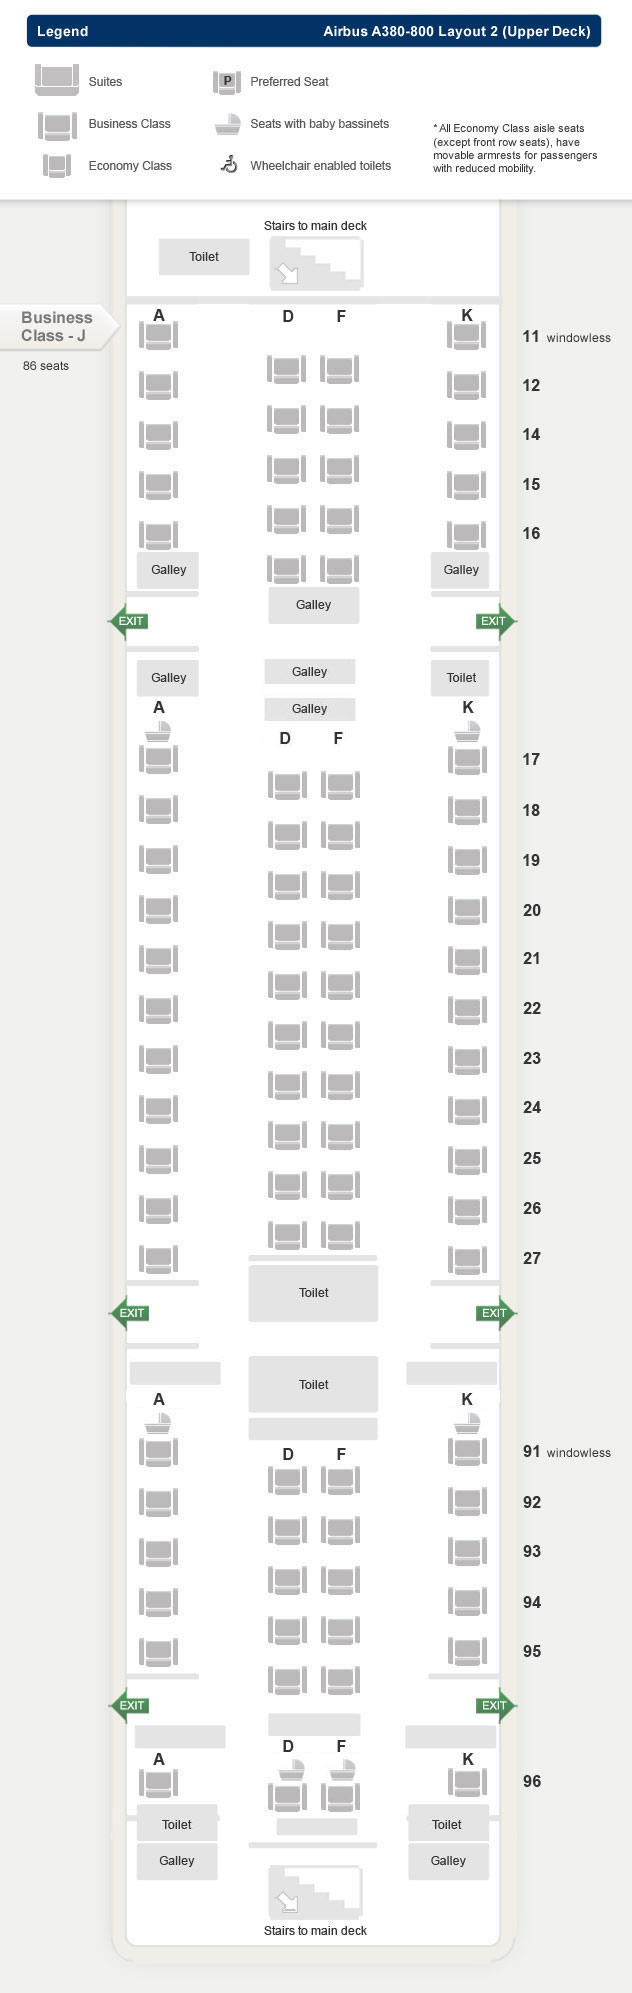 SINGAPORE AIR AIRLINES AIRBUS A380-800 LAYOUT 2 (UPPER DECK) AIRCRAFT SEATING CHART